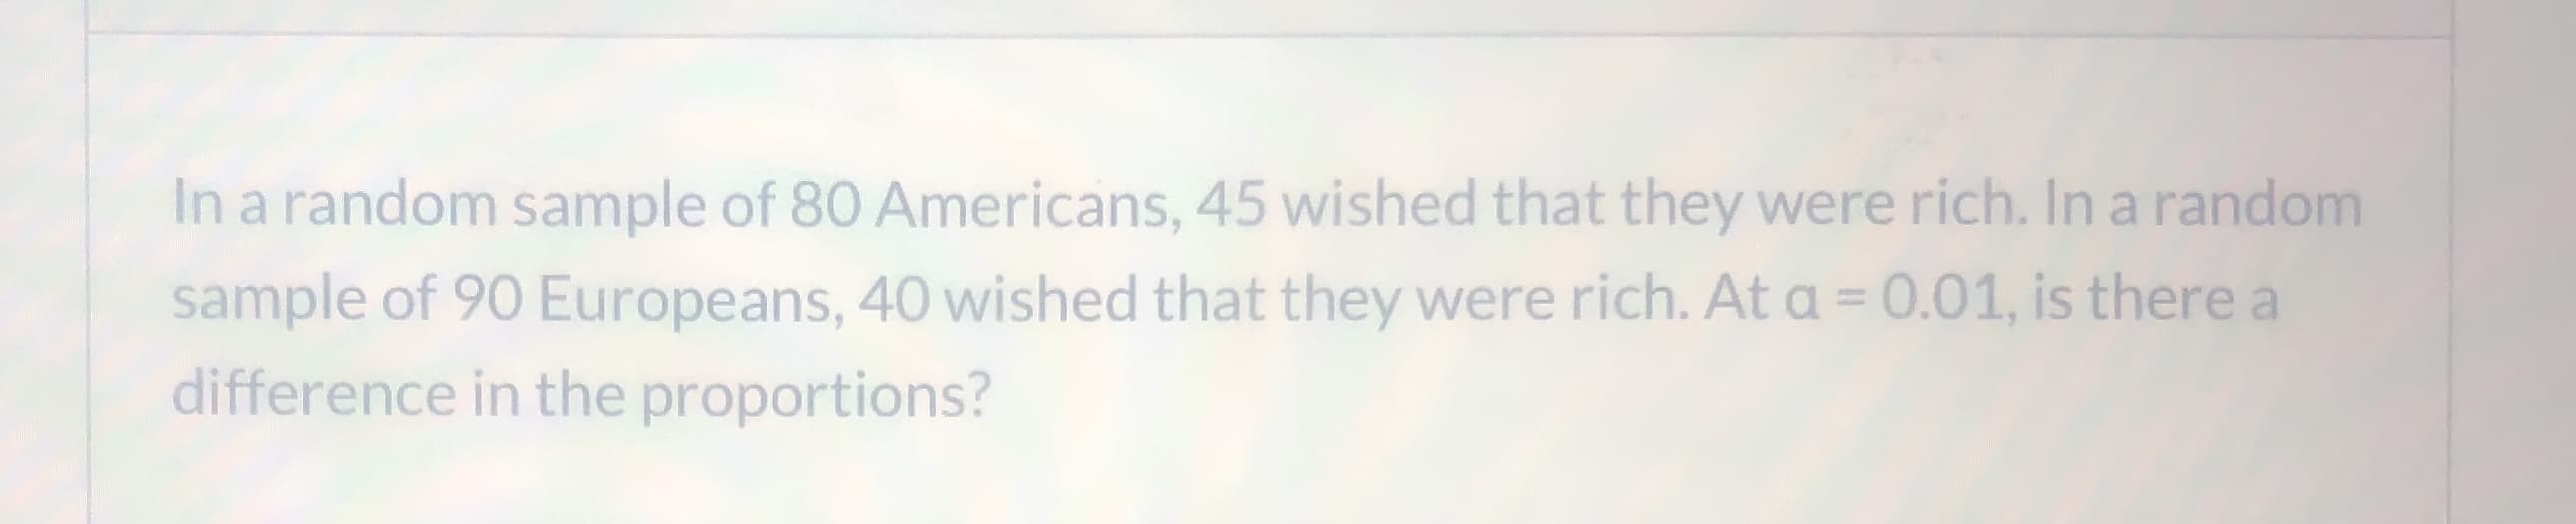 In a random sample of 80 Americans, 45 wished that they were rich. In a random
sample of 90 Europeans, 40 wished that they were rich. At a = 0.01, is there a
%3D
difference in the proportions?
